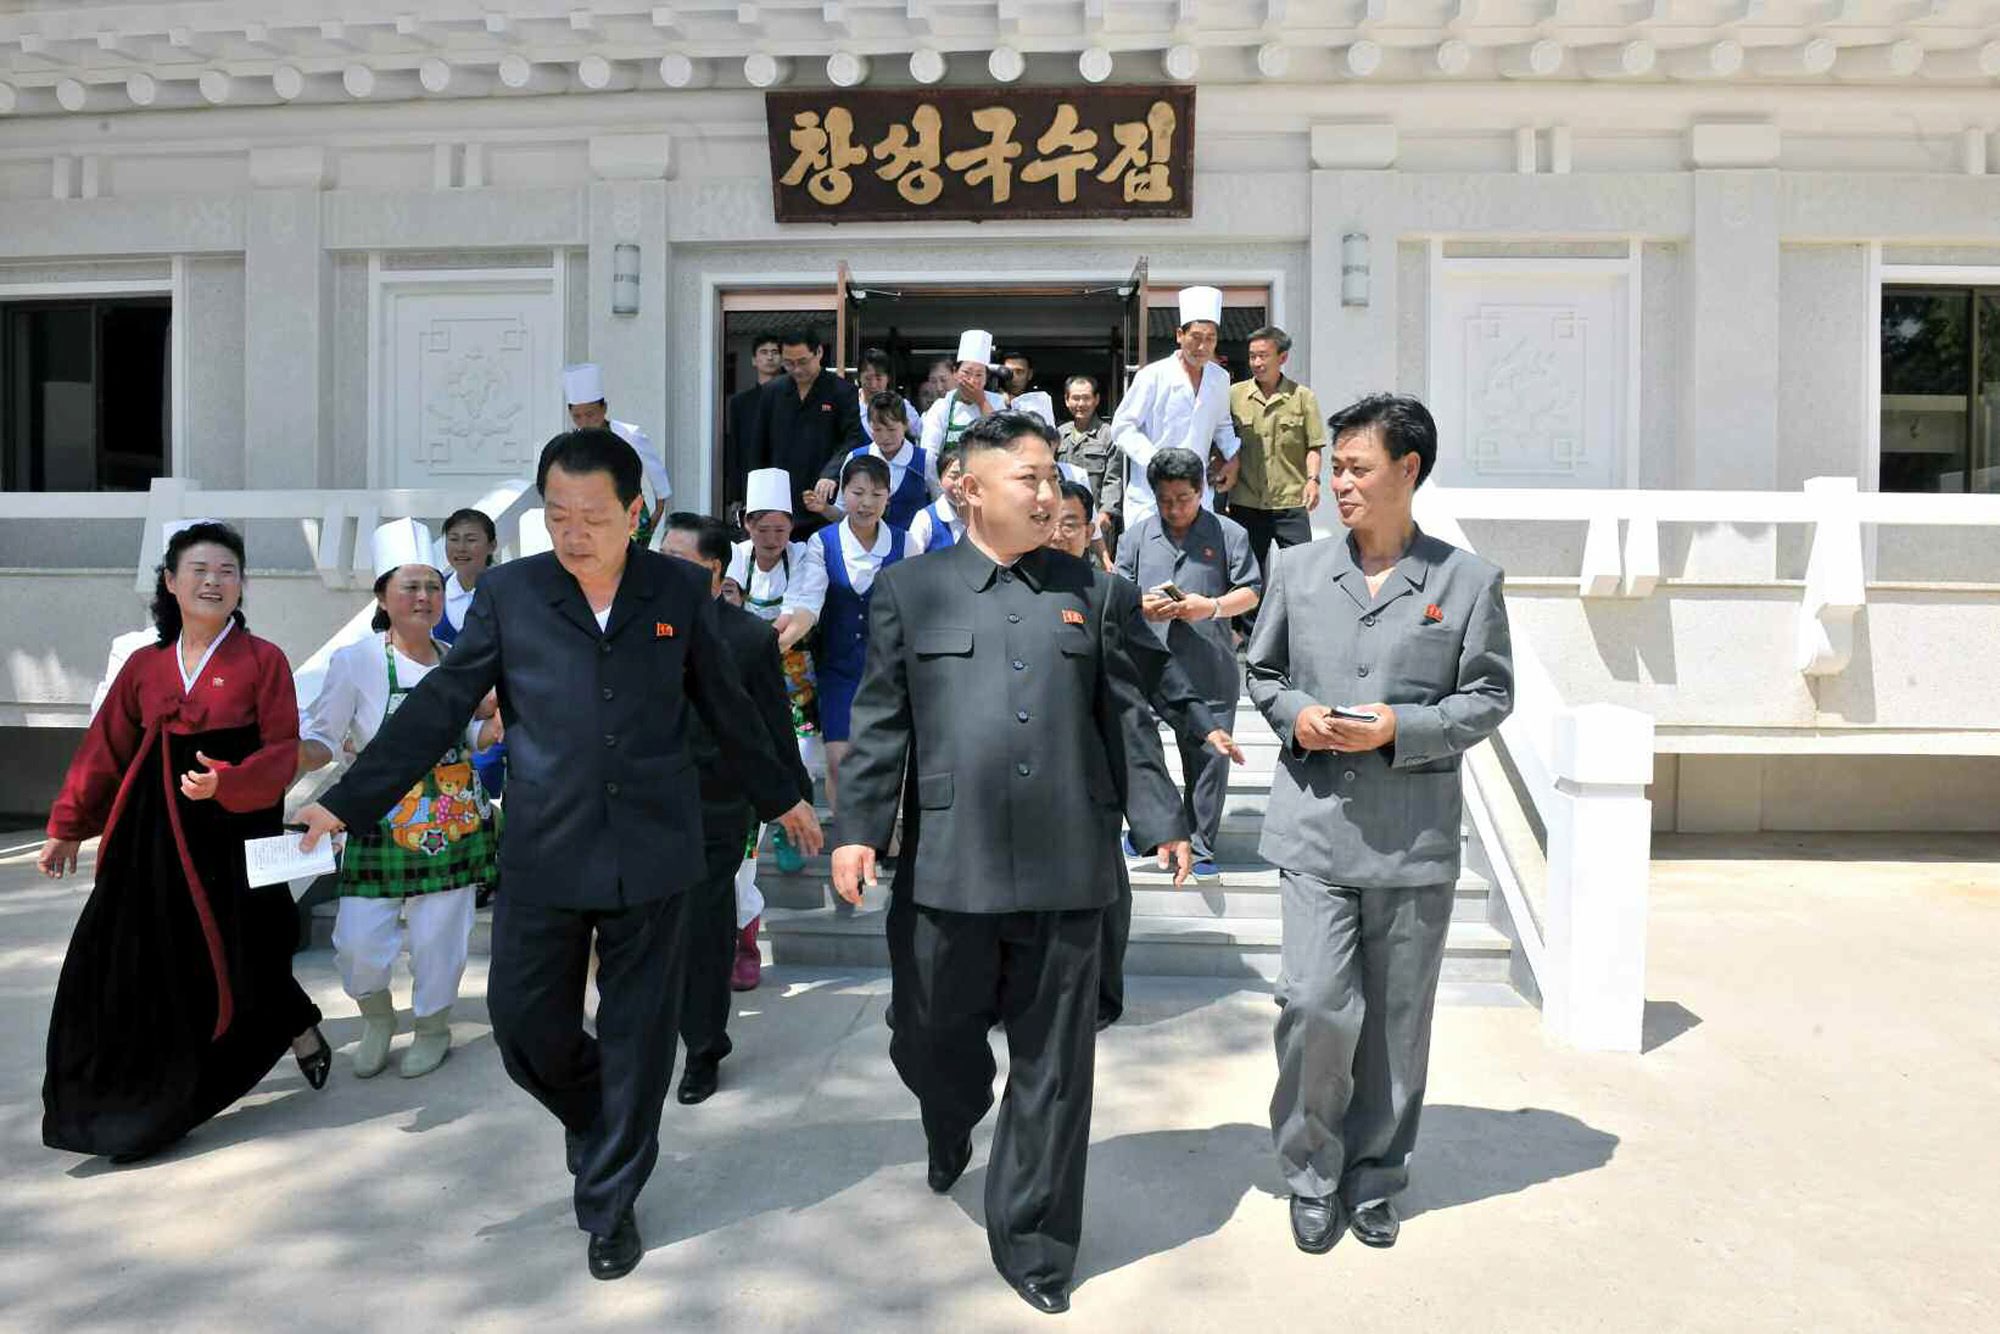 Earlier this year, North Korean leader Kim Jong-un (centre) enshrined the drive to build a nuclear arsenal, as well as building the economy, as national goals. Photo: EPA